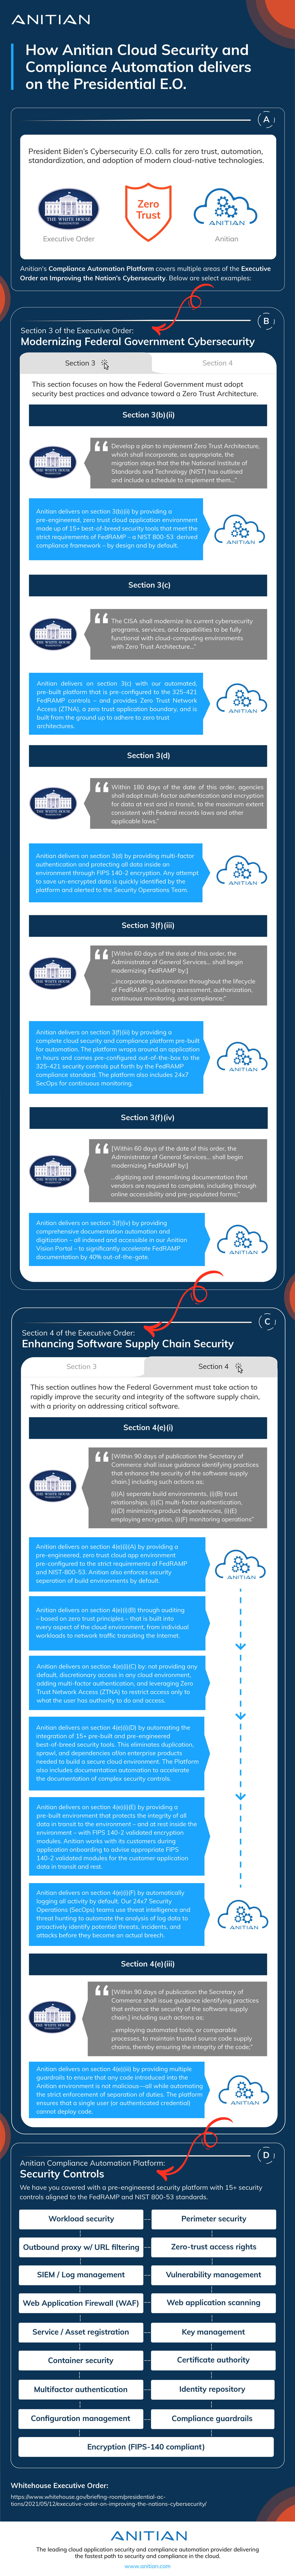 Anitian Infographic - Cloud Security Automation - The Fastest Path to Zero Trust